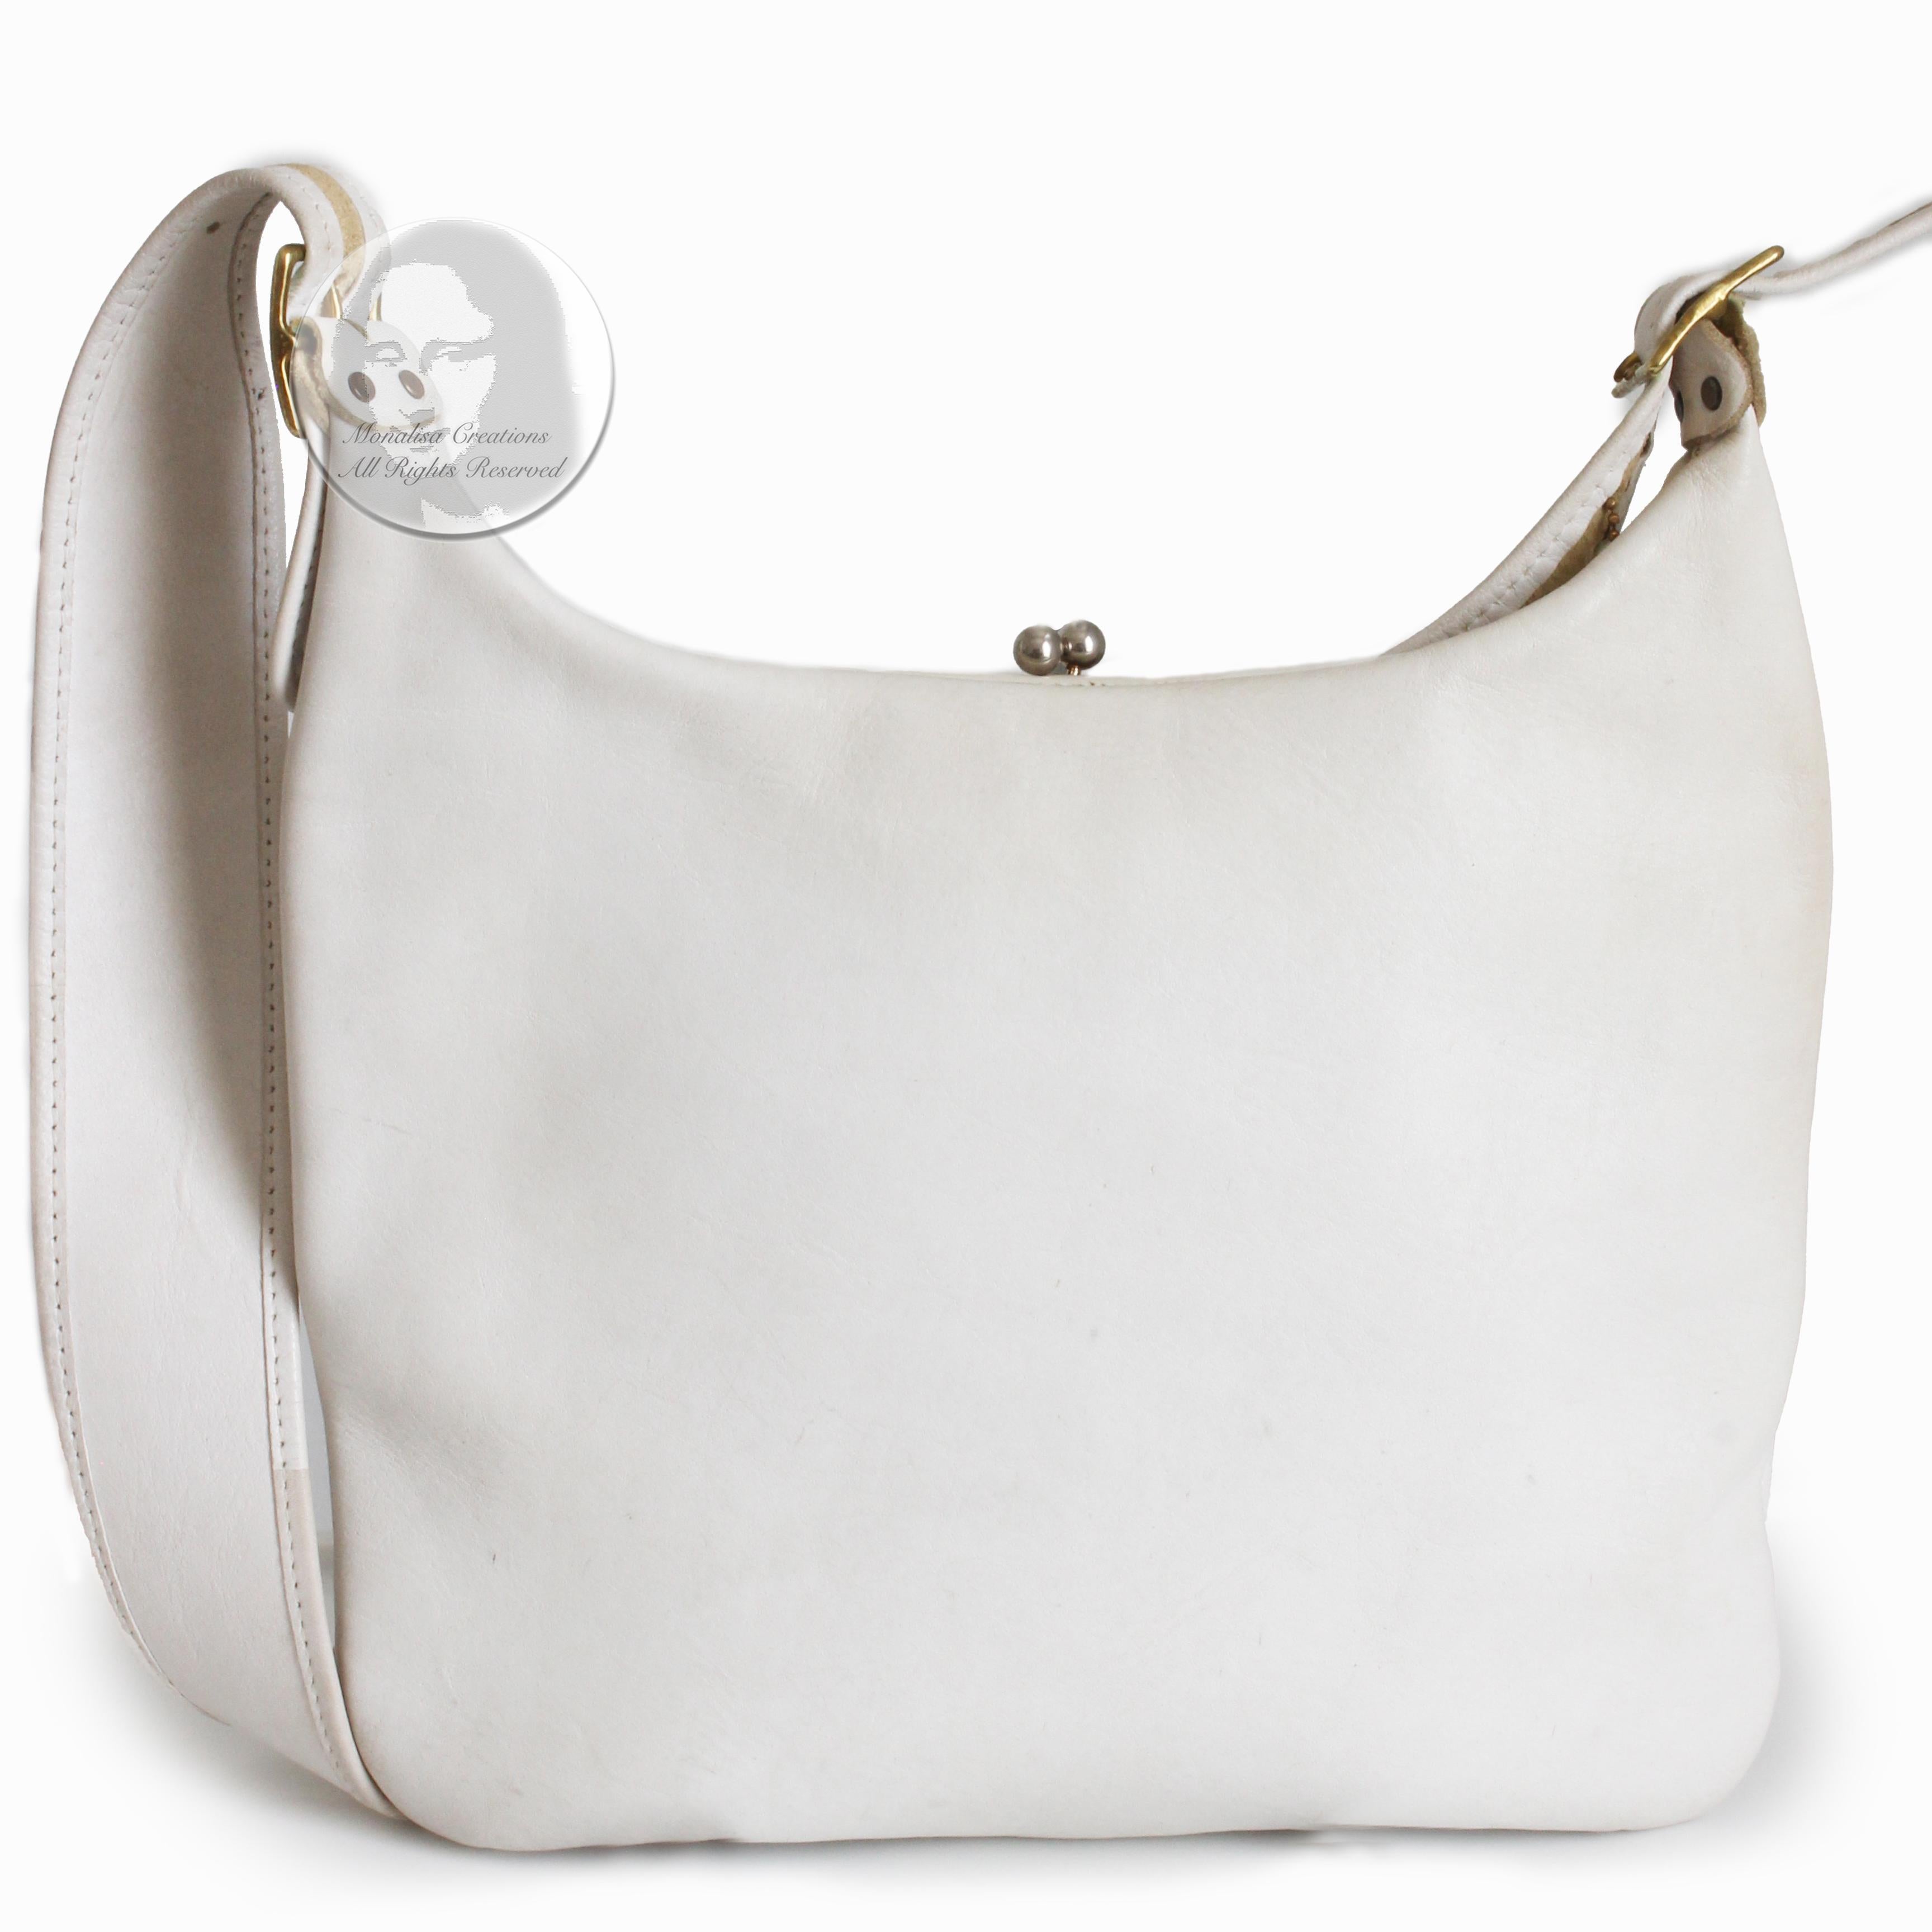 Bonnie Cashin for Coach Frame Bag Rare White Leather with Hang Tag Vintage 70s 2